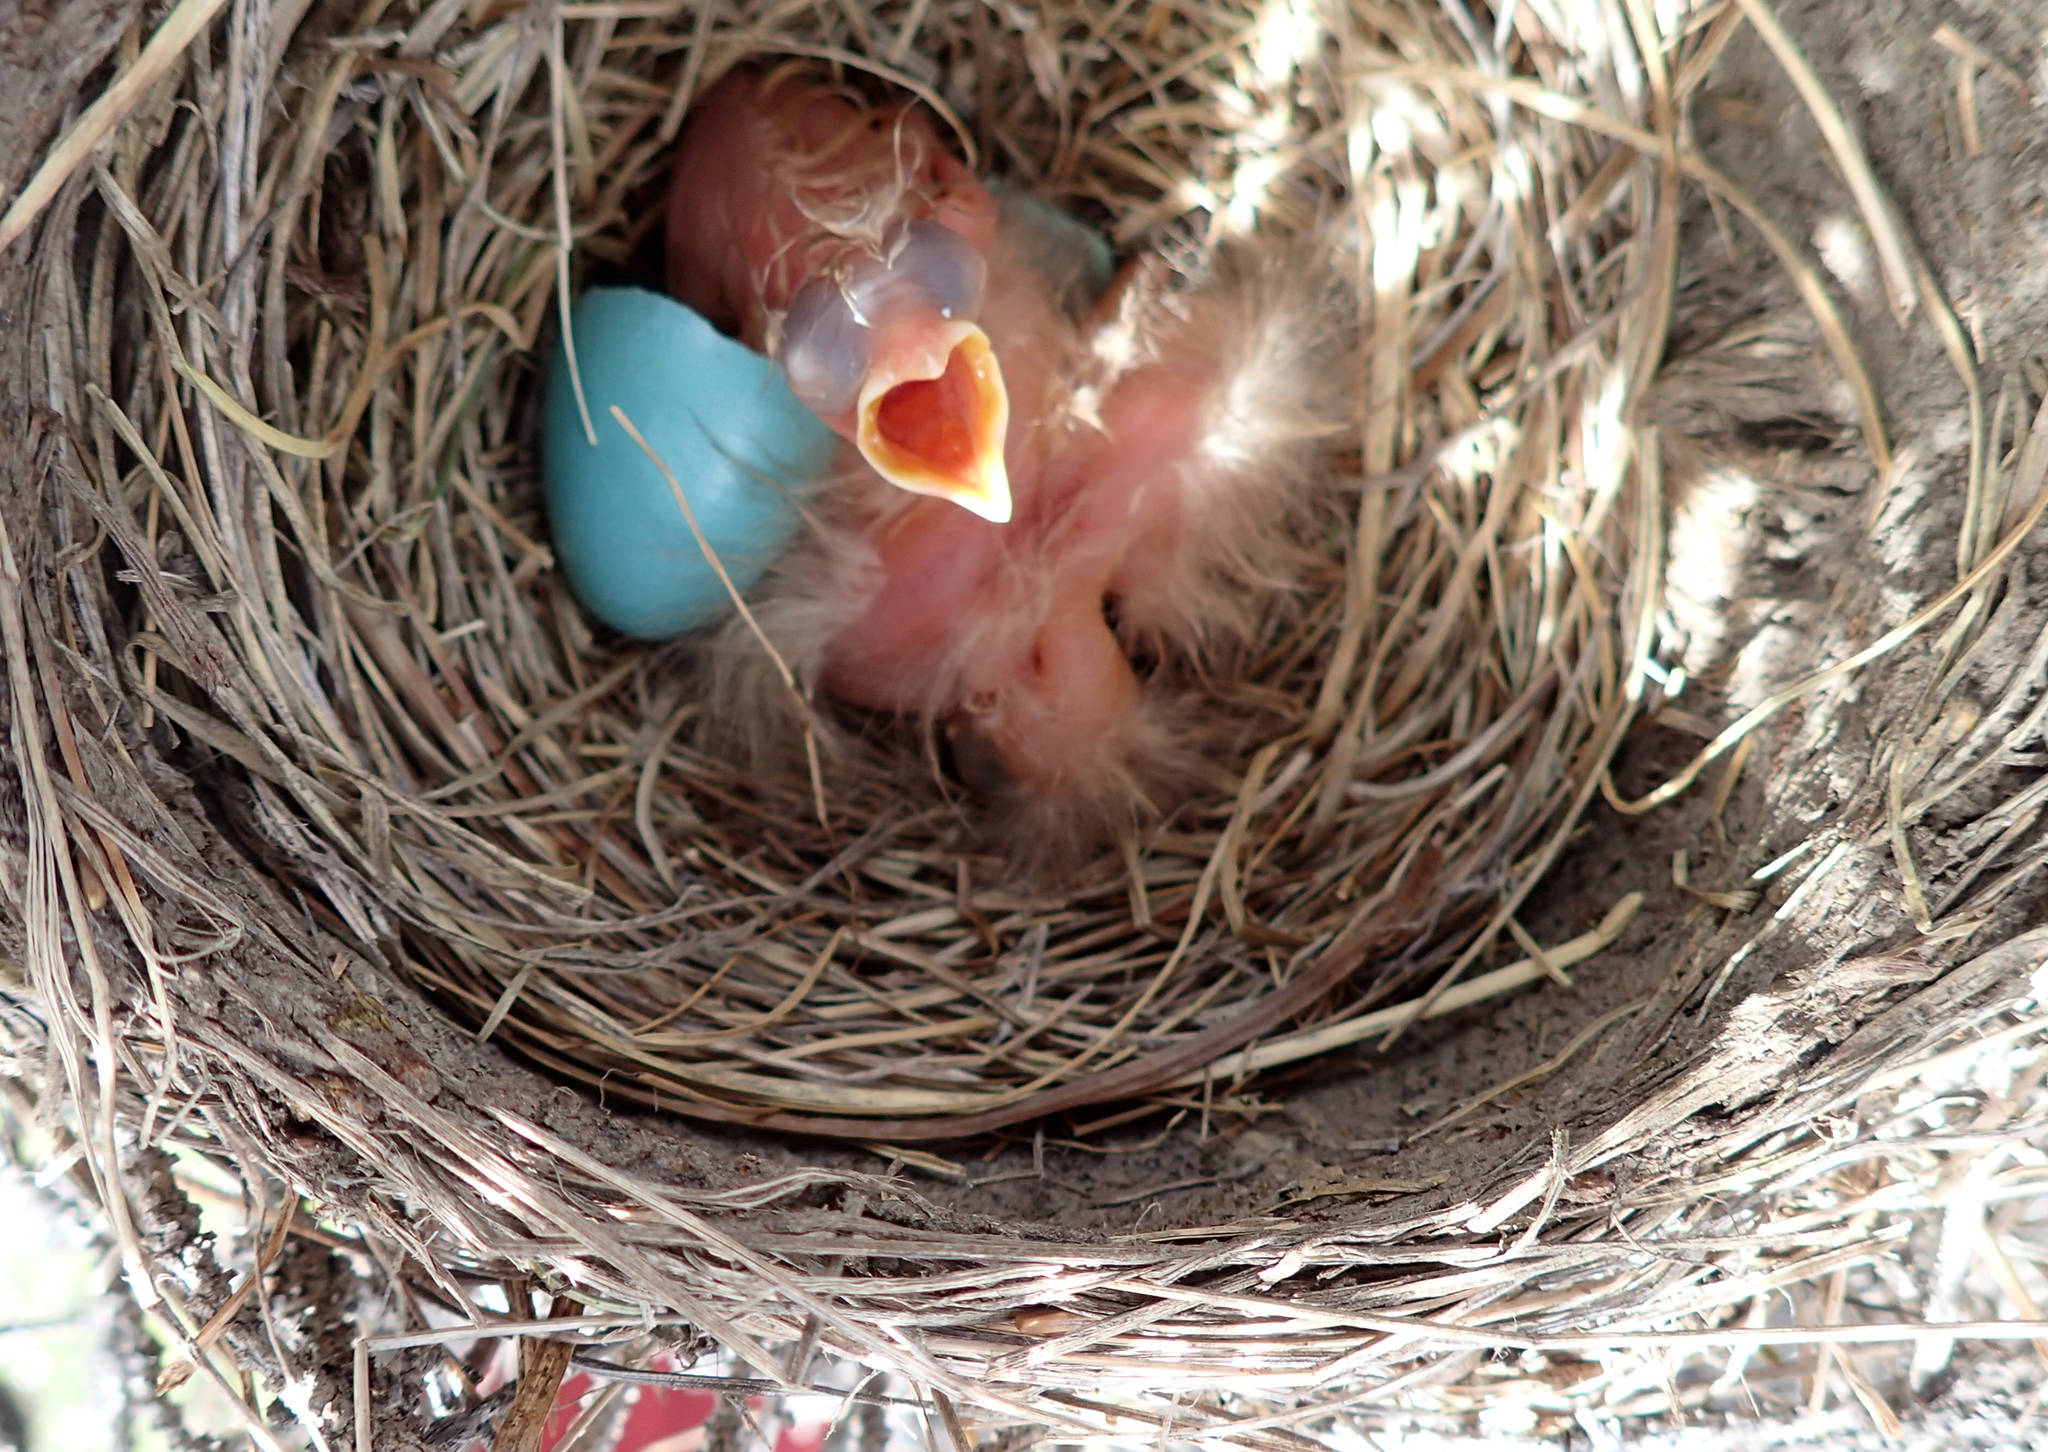 Sense of smell is important for birds, like these robin chicks. (Courtesy Photo | Ned Rozell)